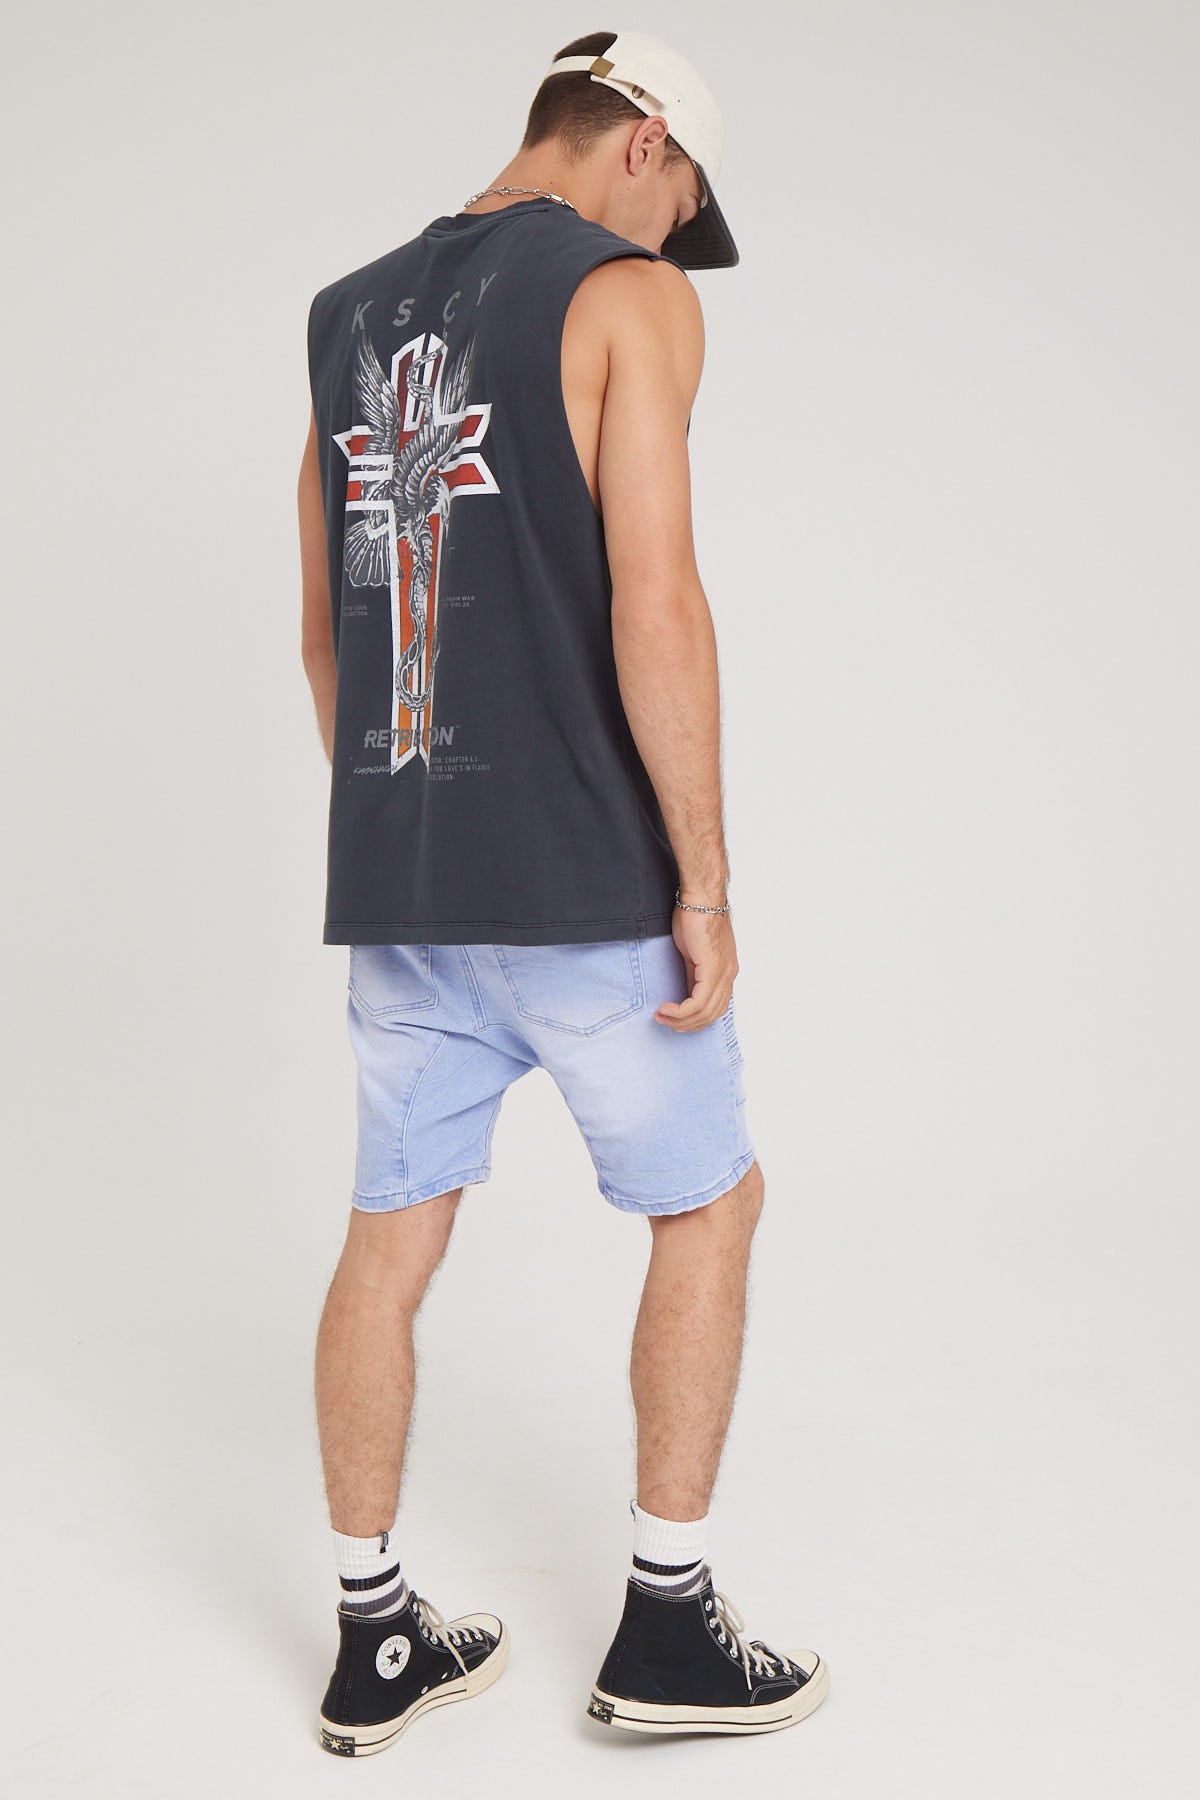 Kiss Chacey Spectra Denim Short Ice Blue